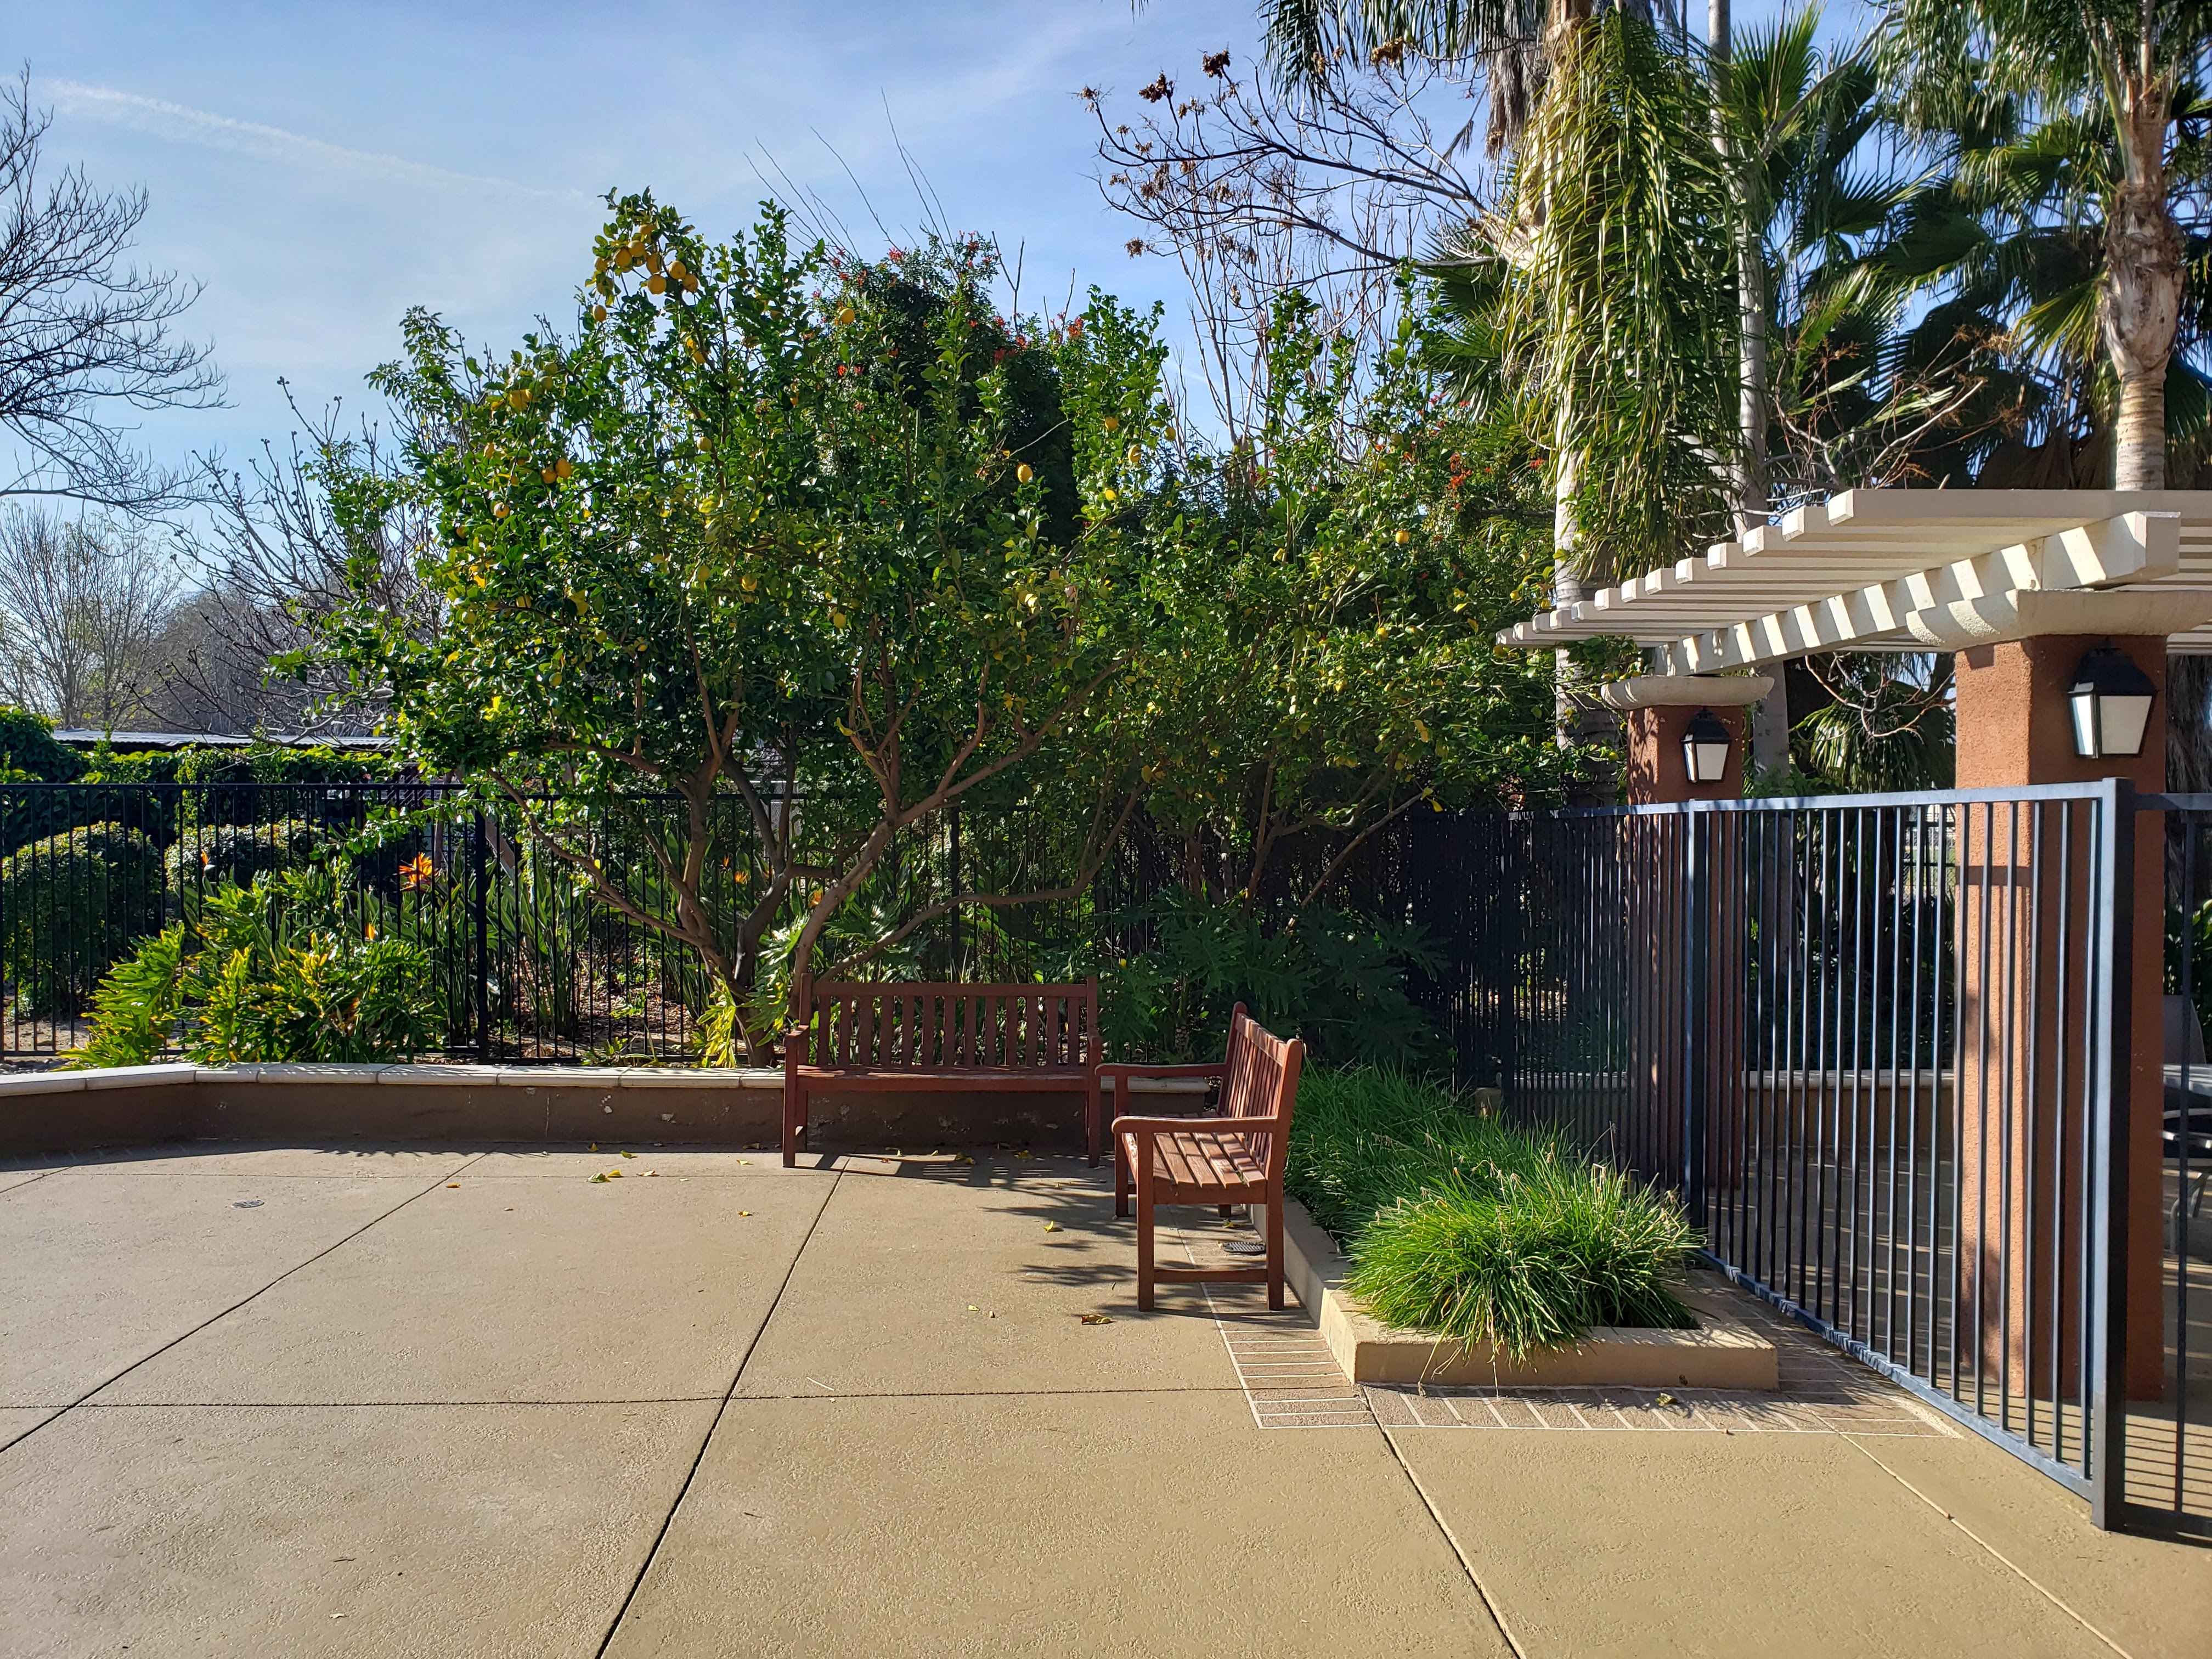 Image of vintage crossing senior apartments. fenced in gazebo area on right side of image. on left side is a large walkway area with bench seating. raised flower beds wrapp around fence.